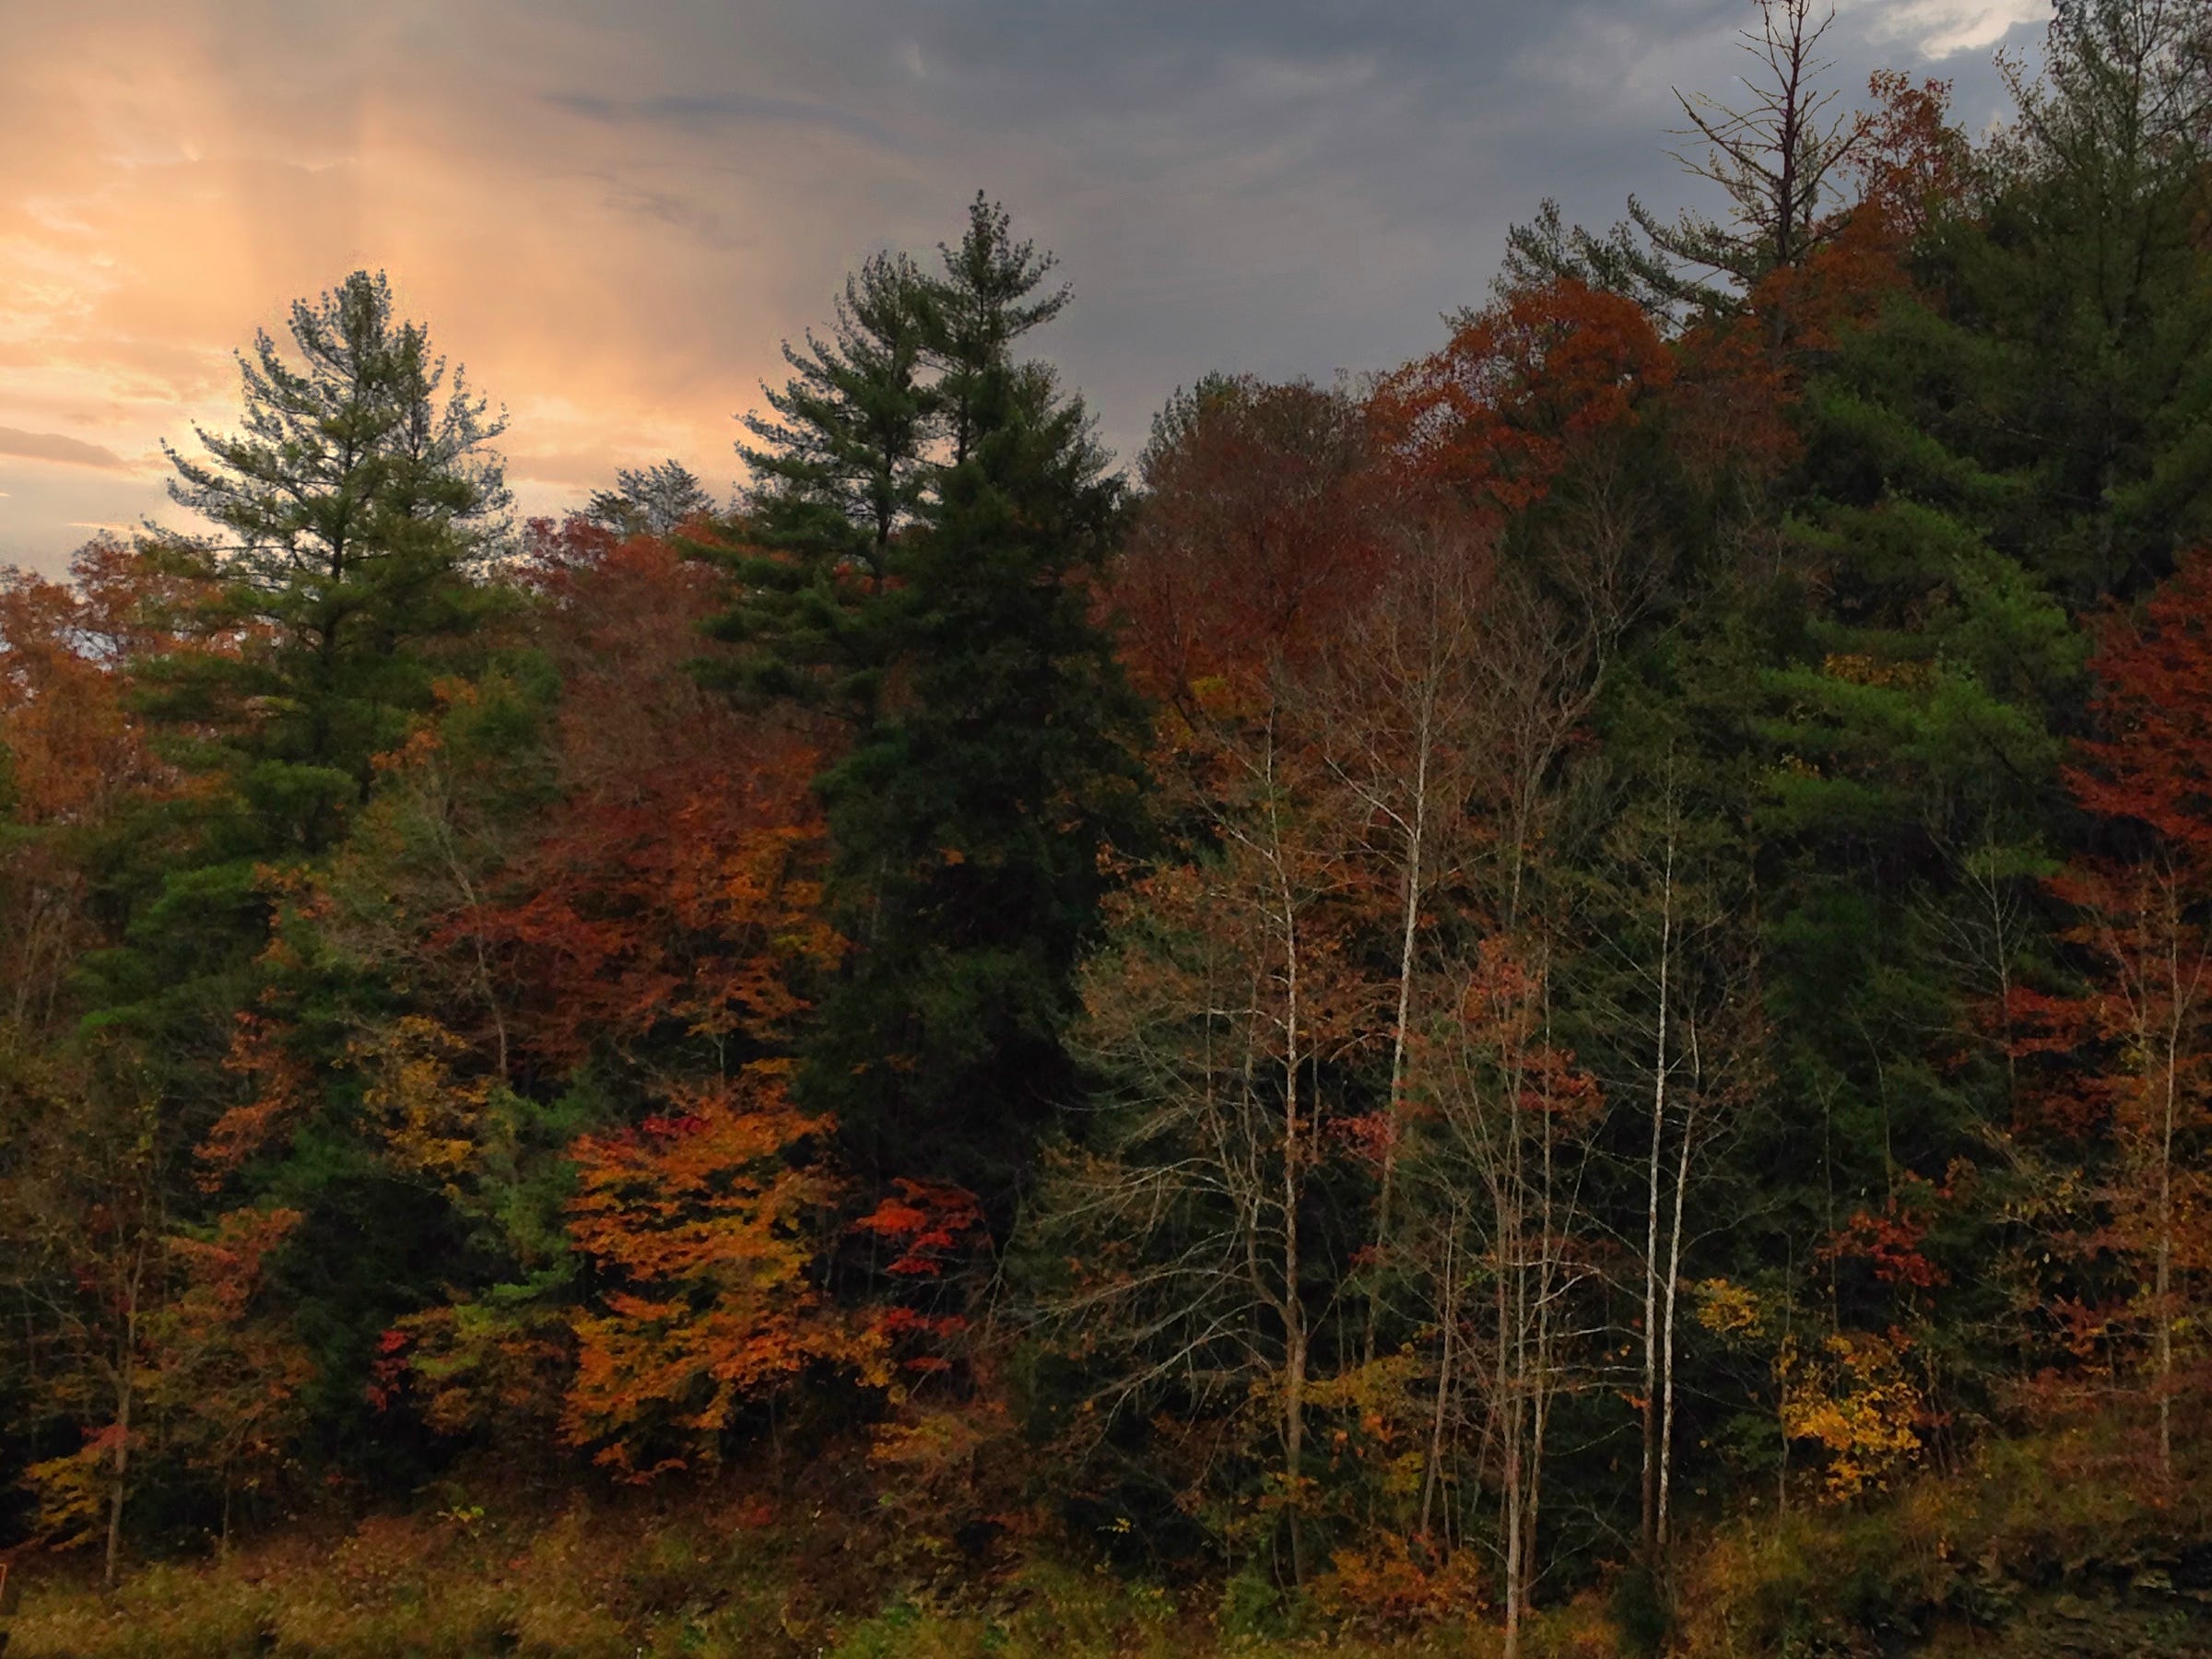 tall trees changing colors  in oranges, browns, and greens against a cloudy sunset sky with the sun shining through the clouds on the left